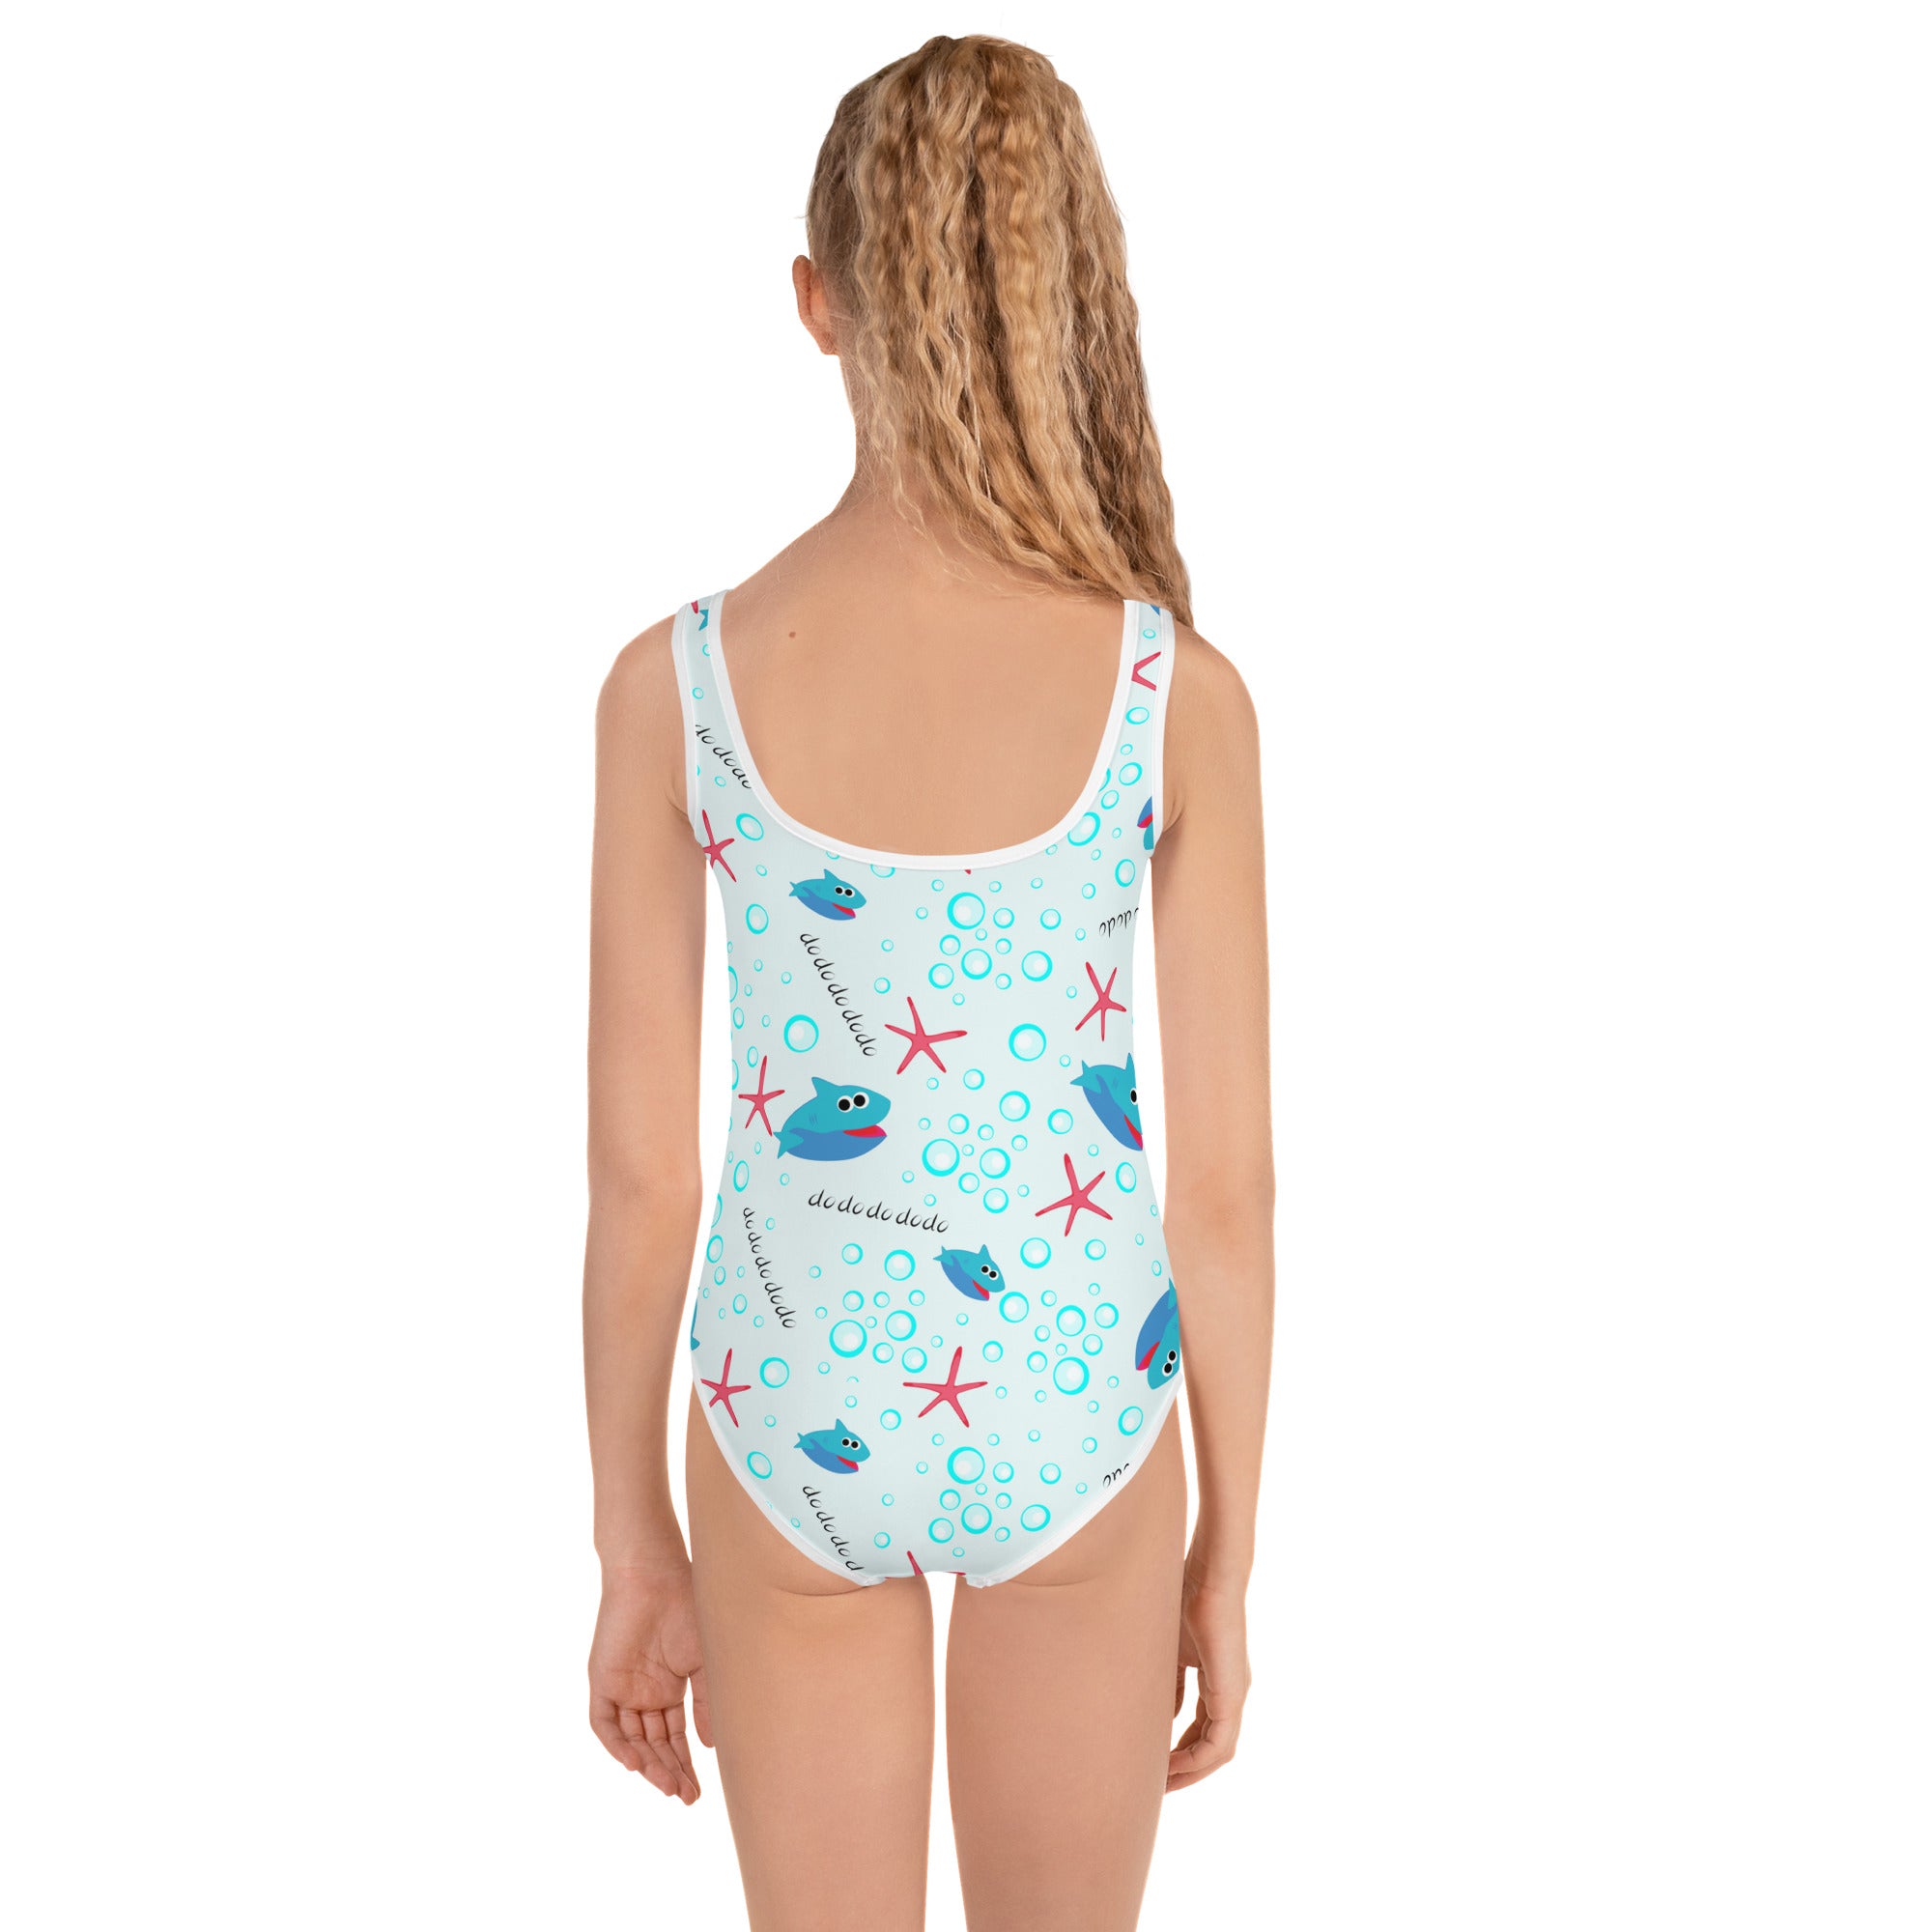 Kids' Printed One-Piece Swimsuit - Baby Shark